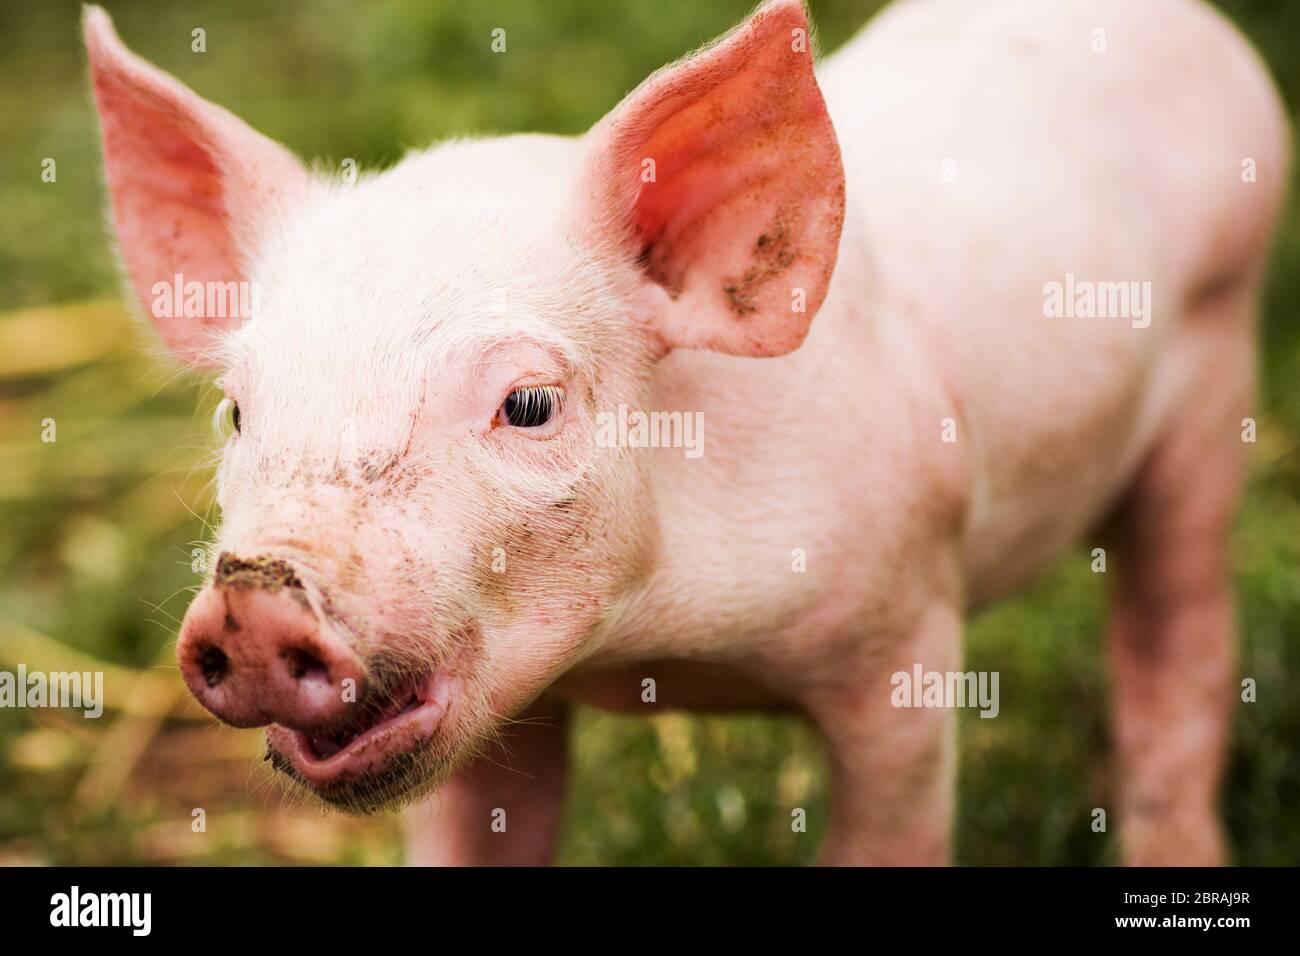 Dirty little pig outdoors, swine breeding and agricultural activity concept. Stock Photo